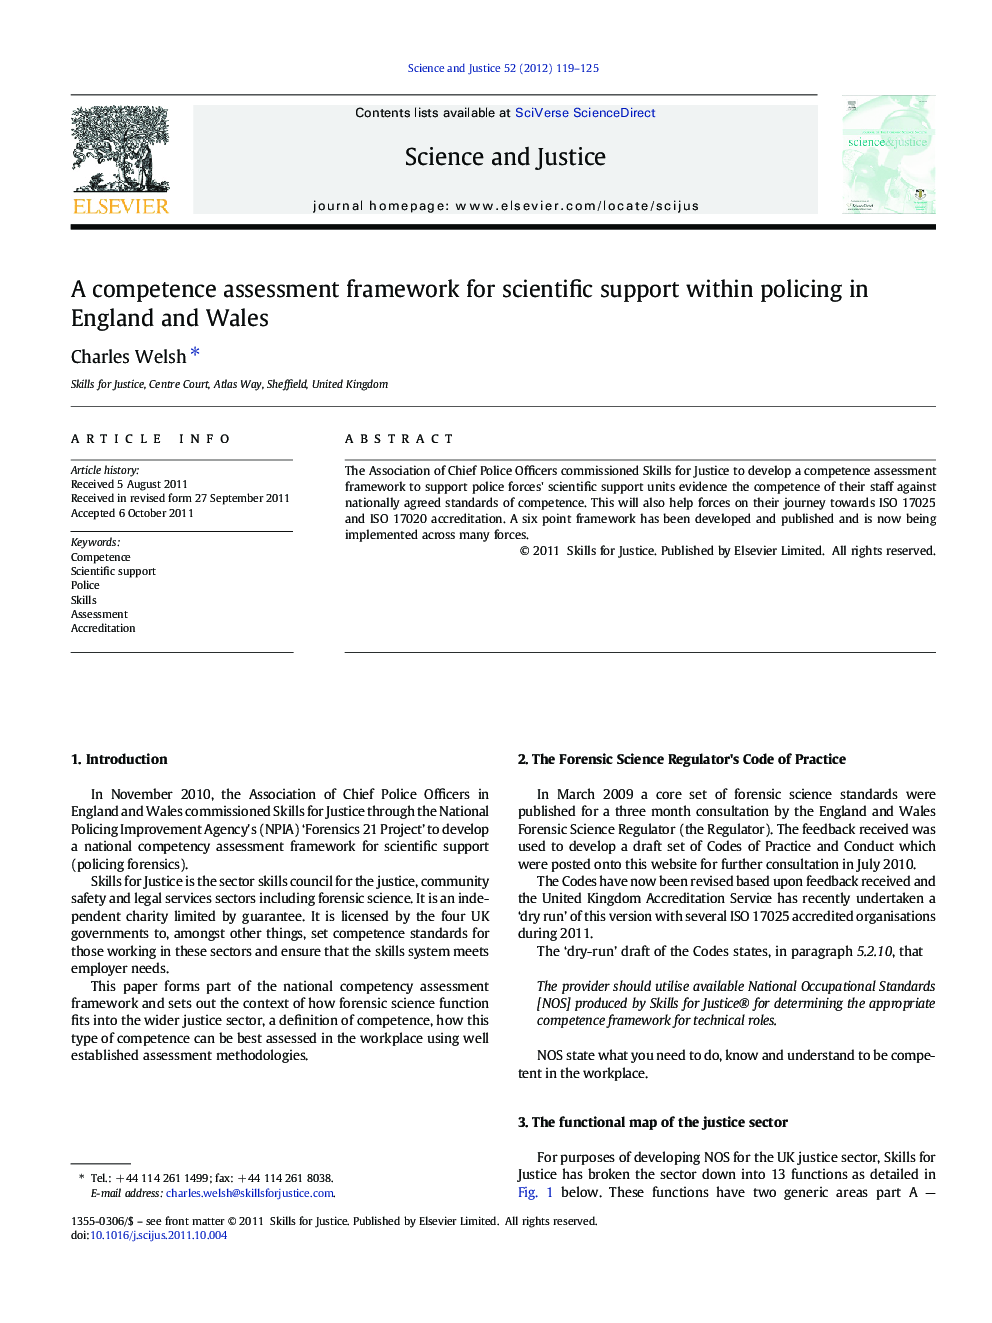 A competence assessment framework for scientific support within policing in England and Wales